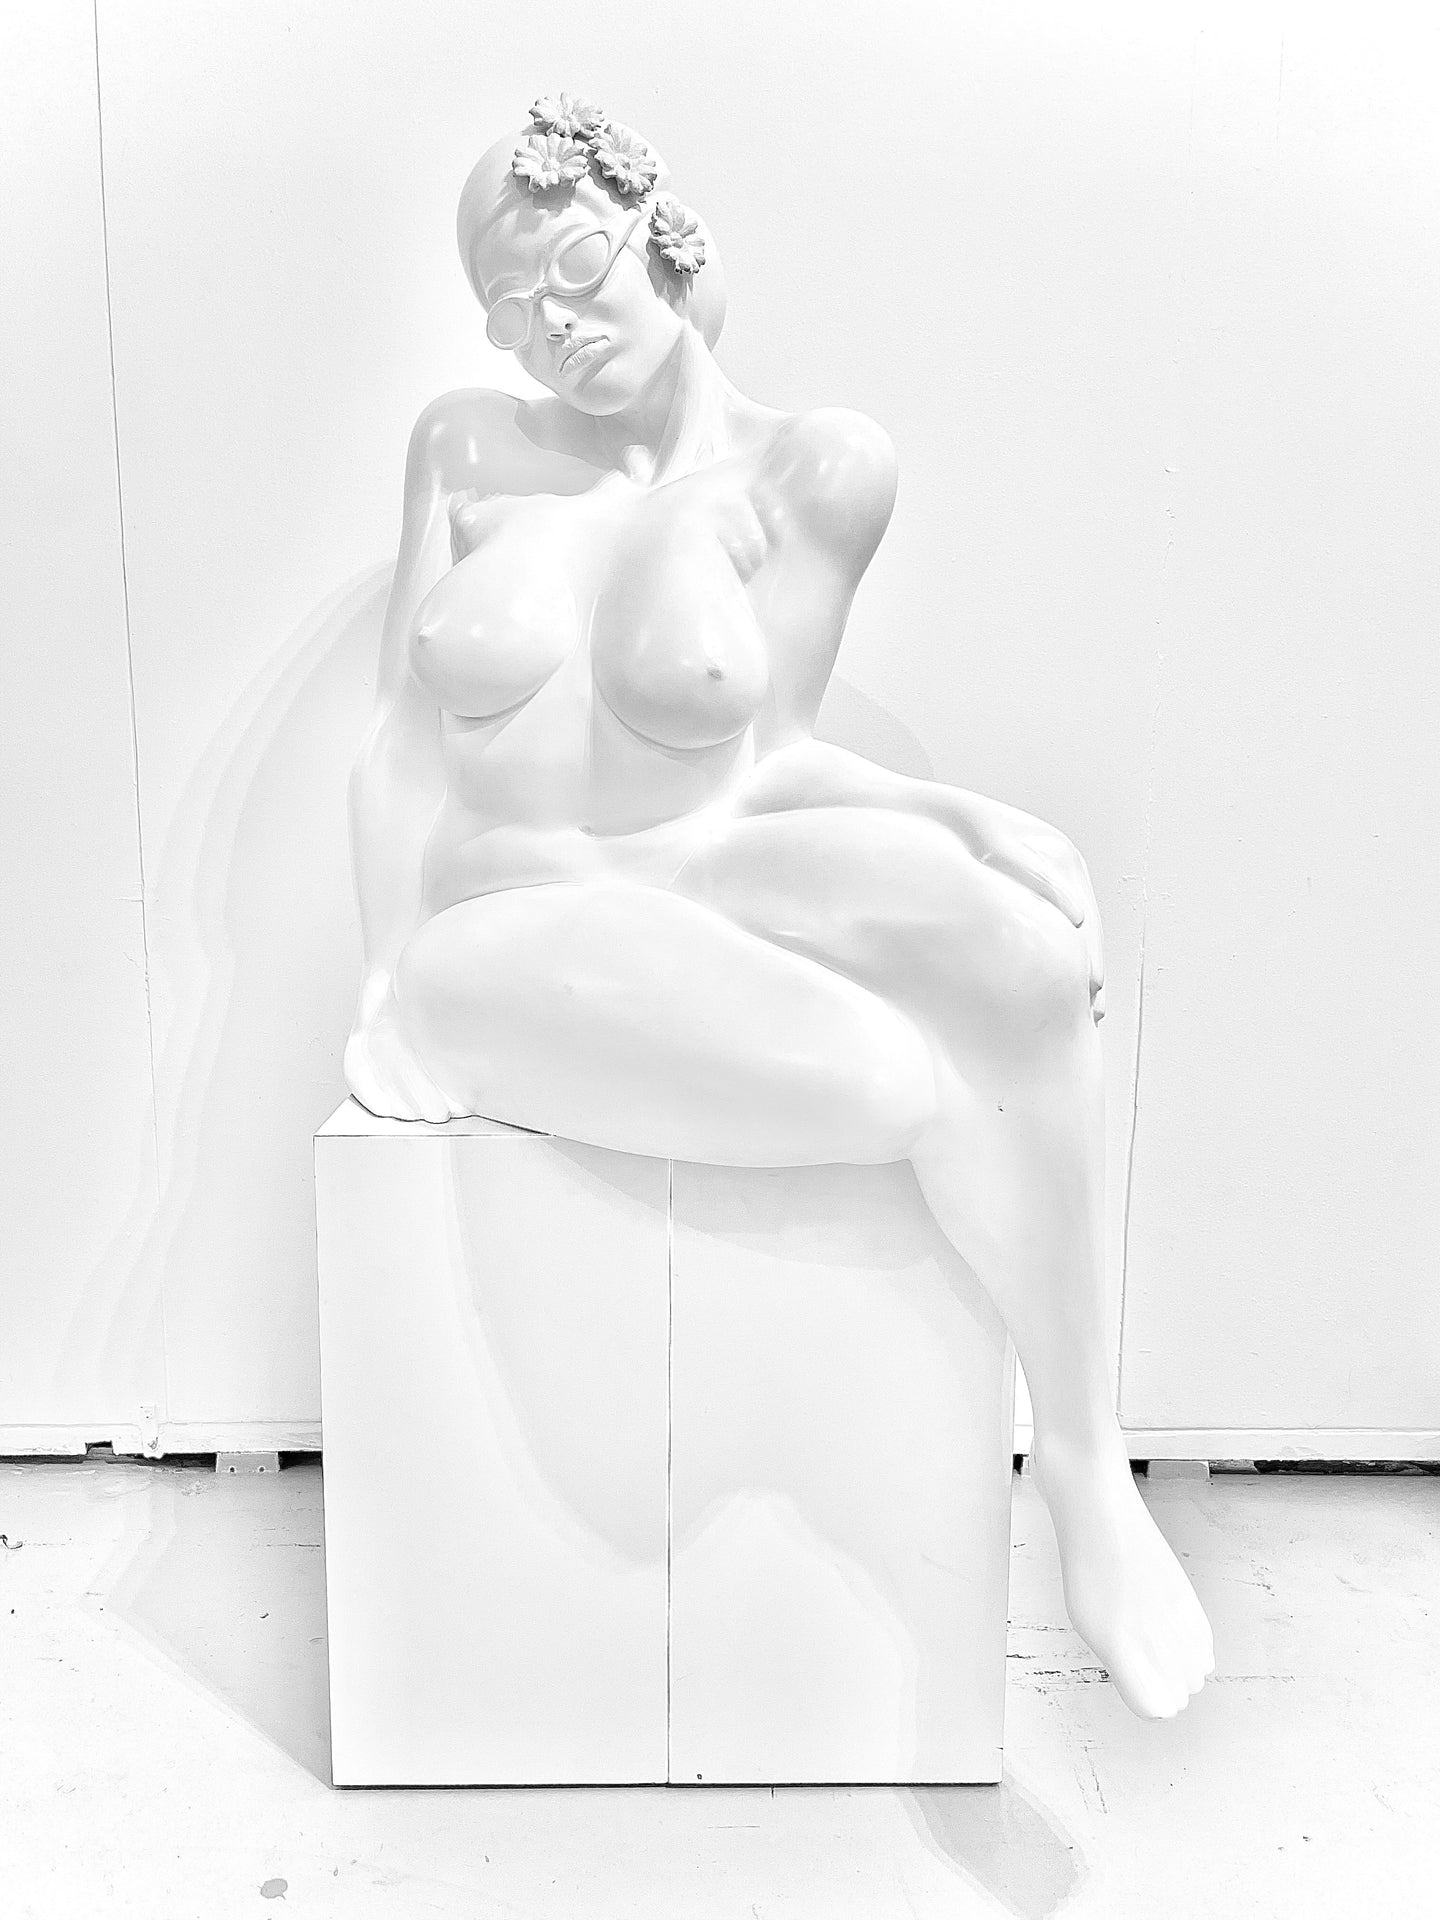 Didier Audrat, TALIMA-white, Female sculpture, 2020, Mixed Polymer sculpture, 50h x 32w x 26d inches, Art Sculptures for sale